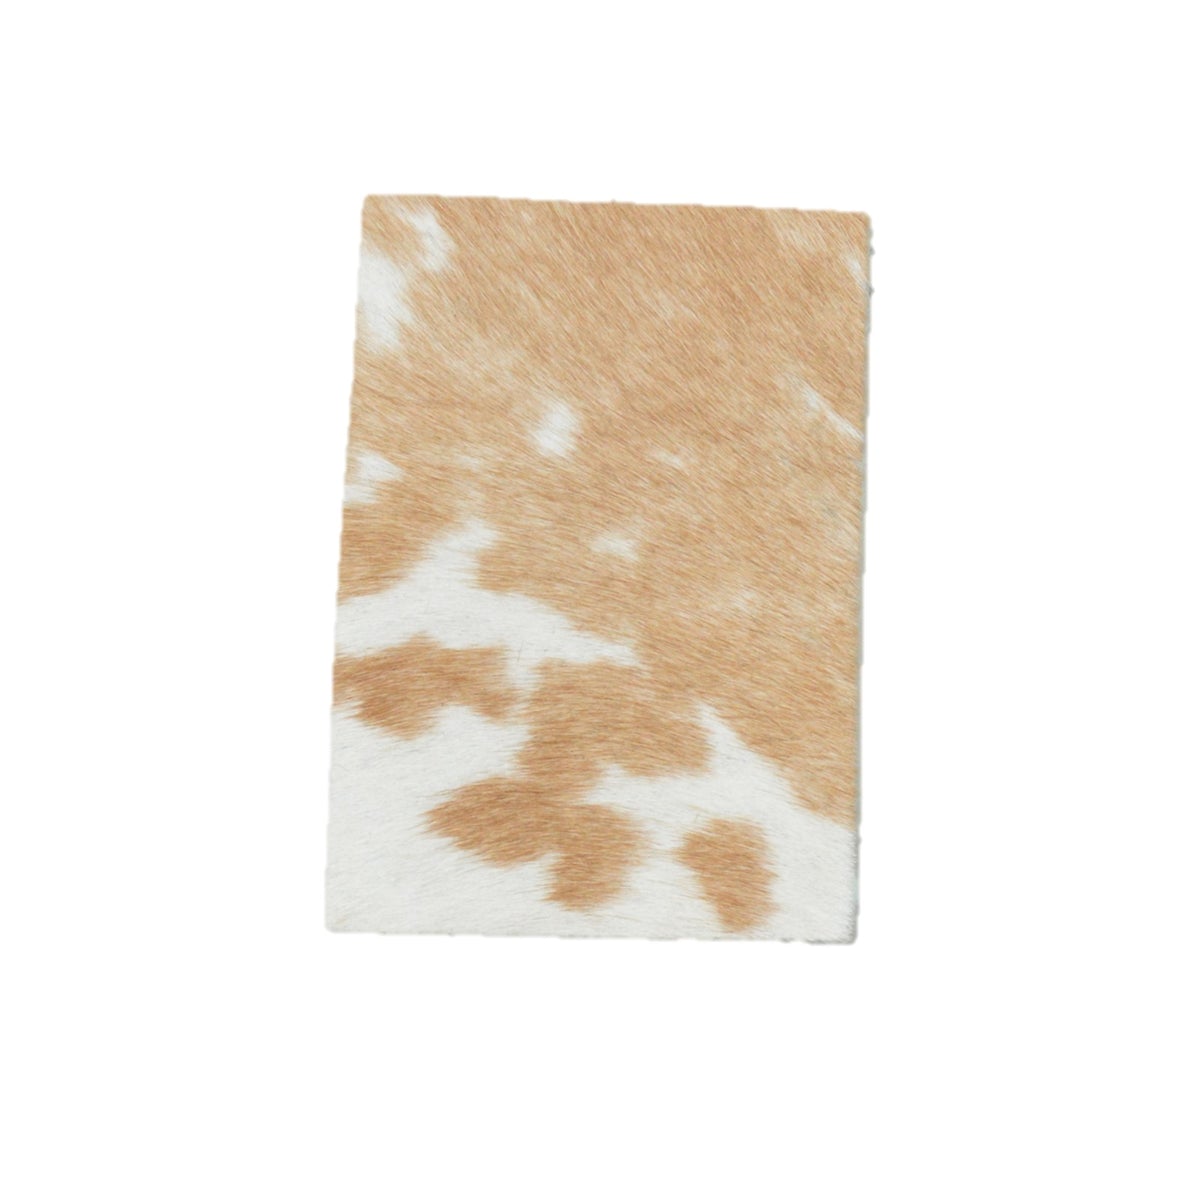 Bi-Color Light Brown Hair on Cow Hide Pre-cuts, 4 x 6 | The Leather Guy